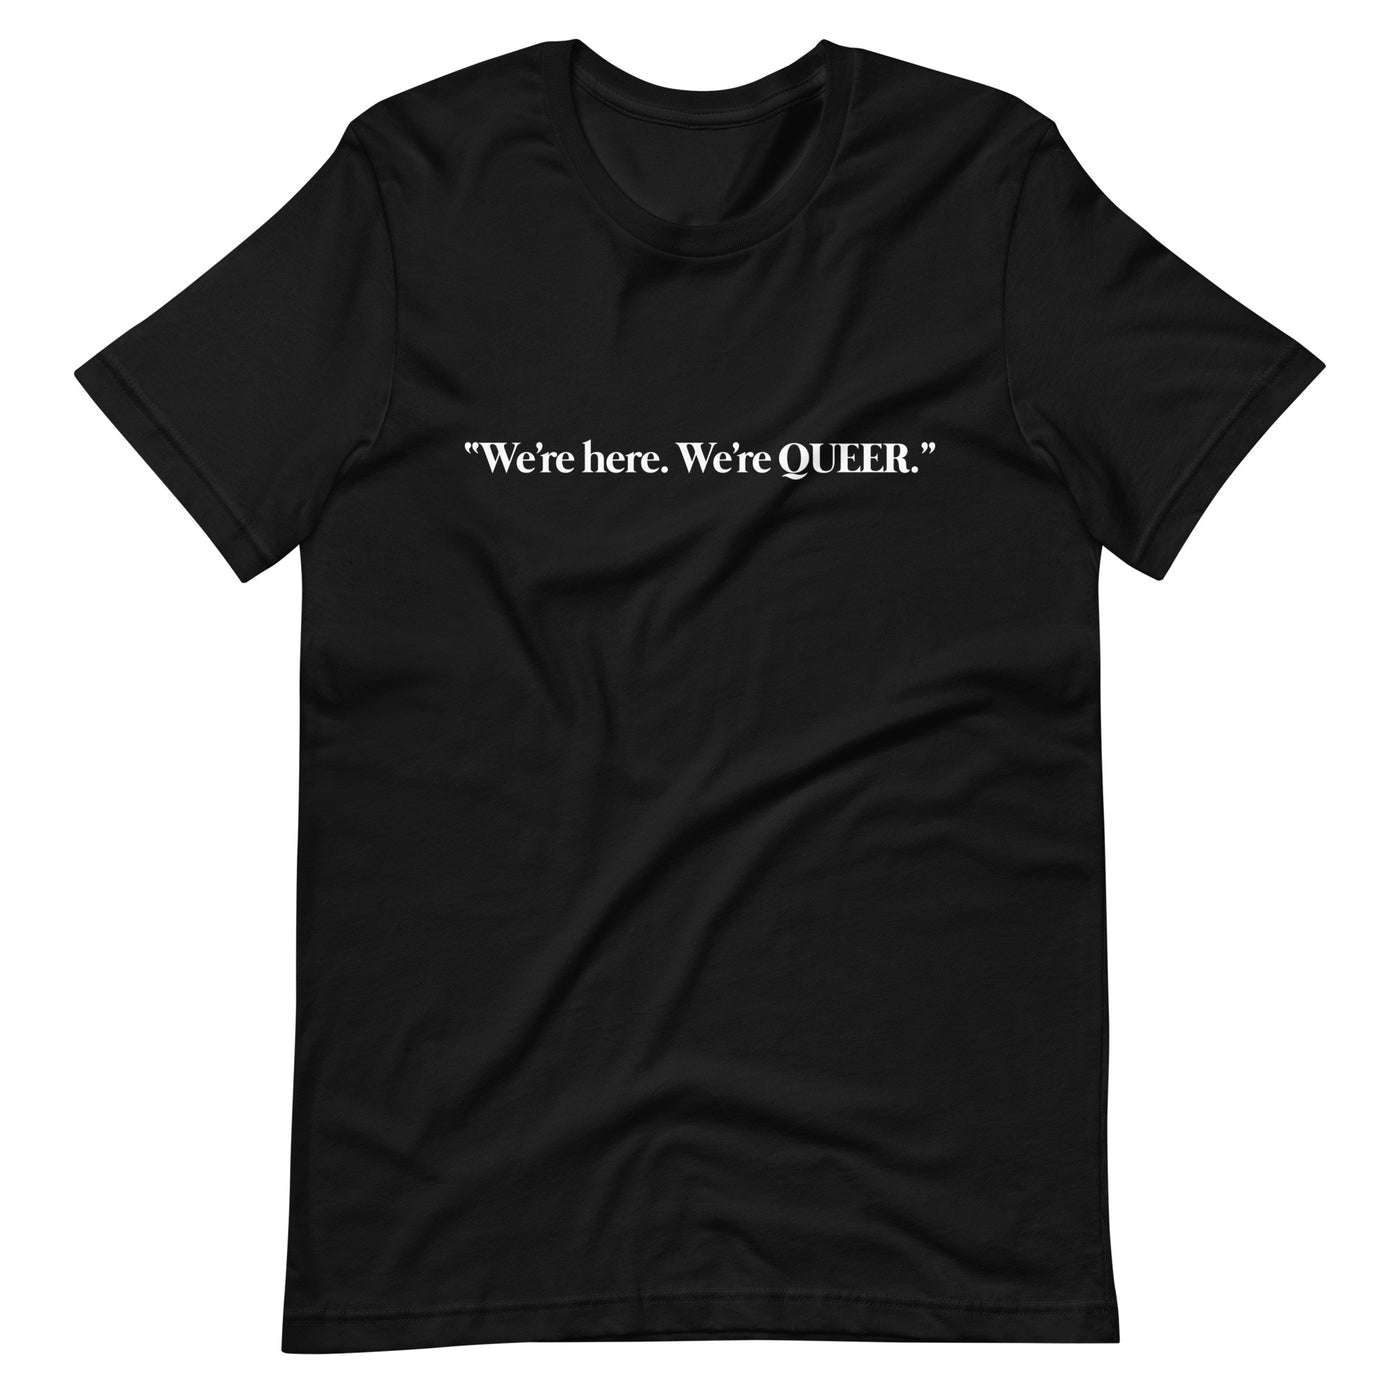 Pride Clothes - Represent and Declare We're Here. We're QUEER. TShirt - Black